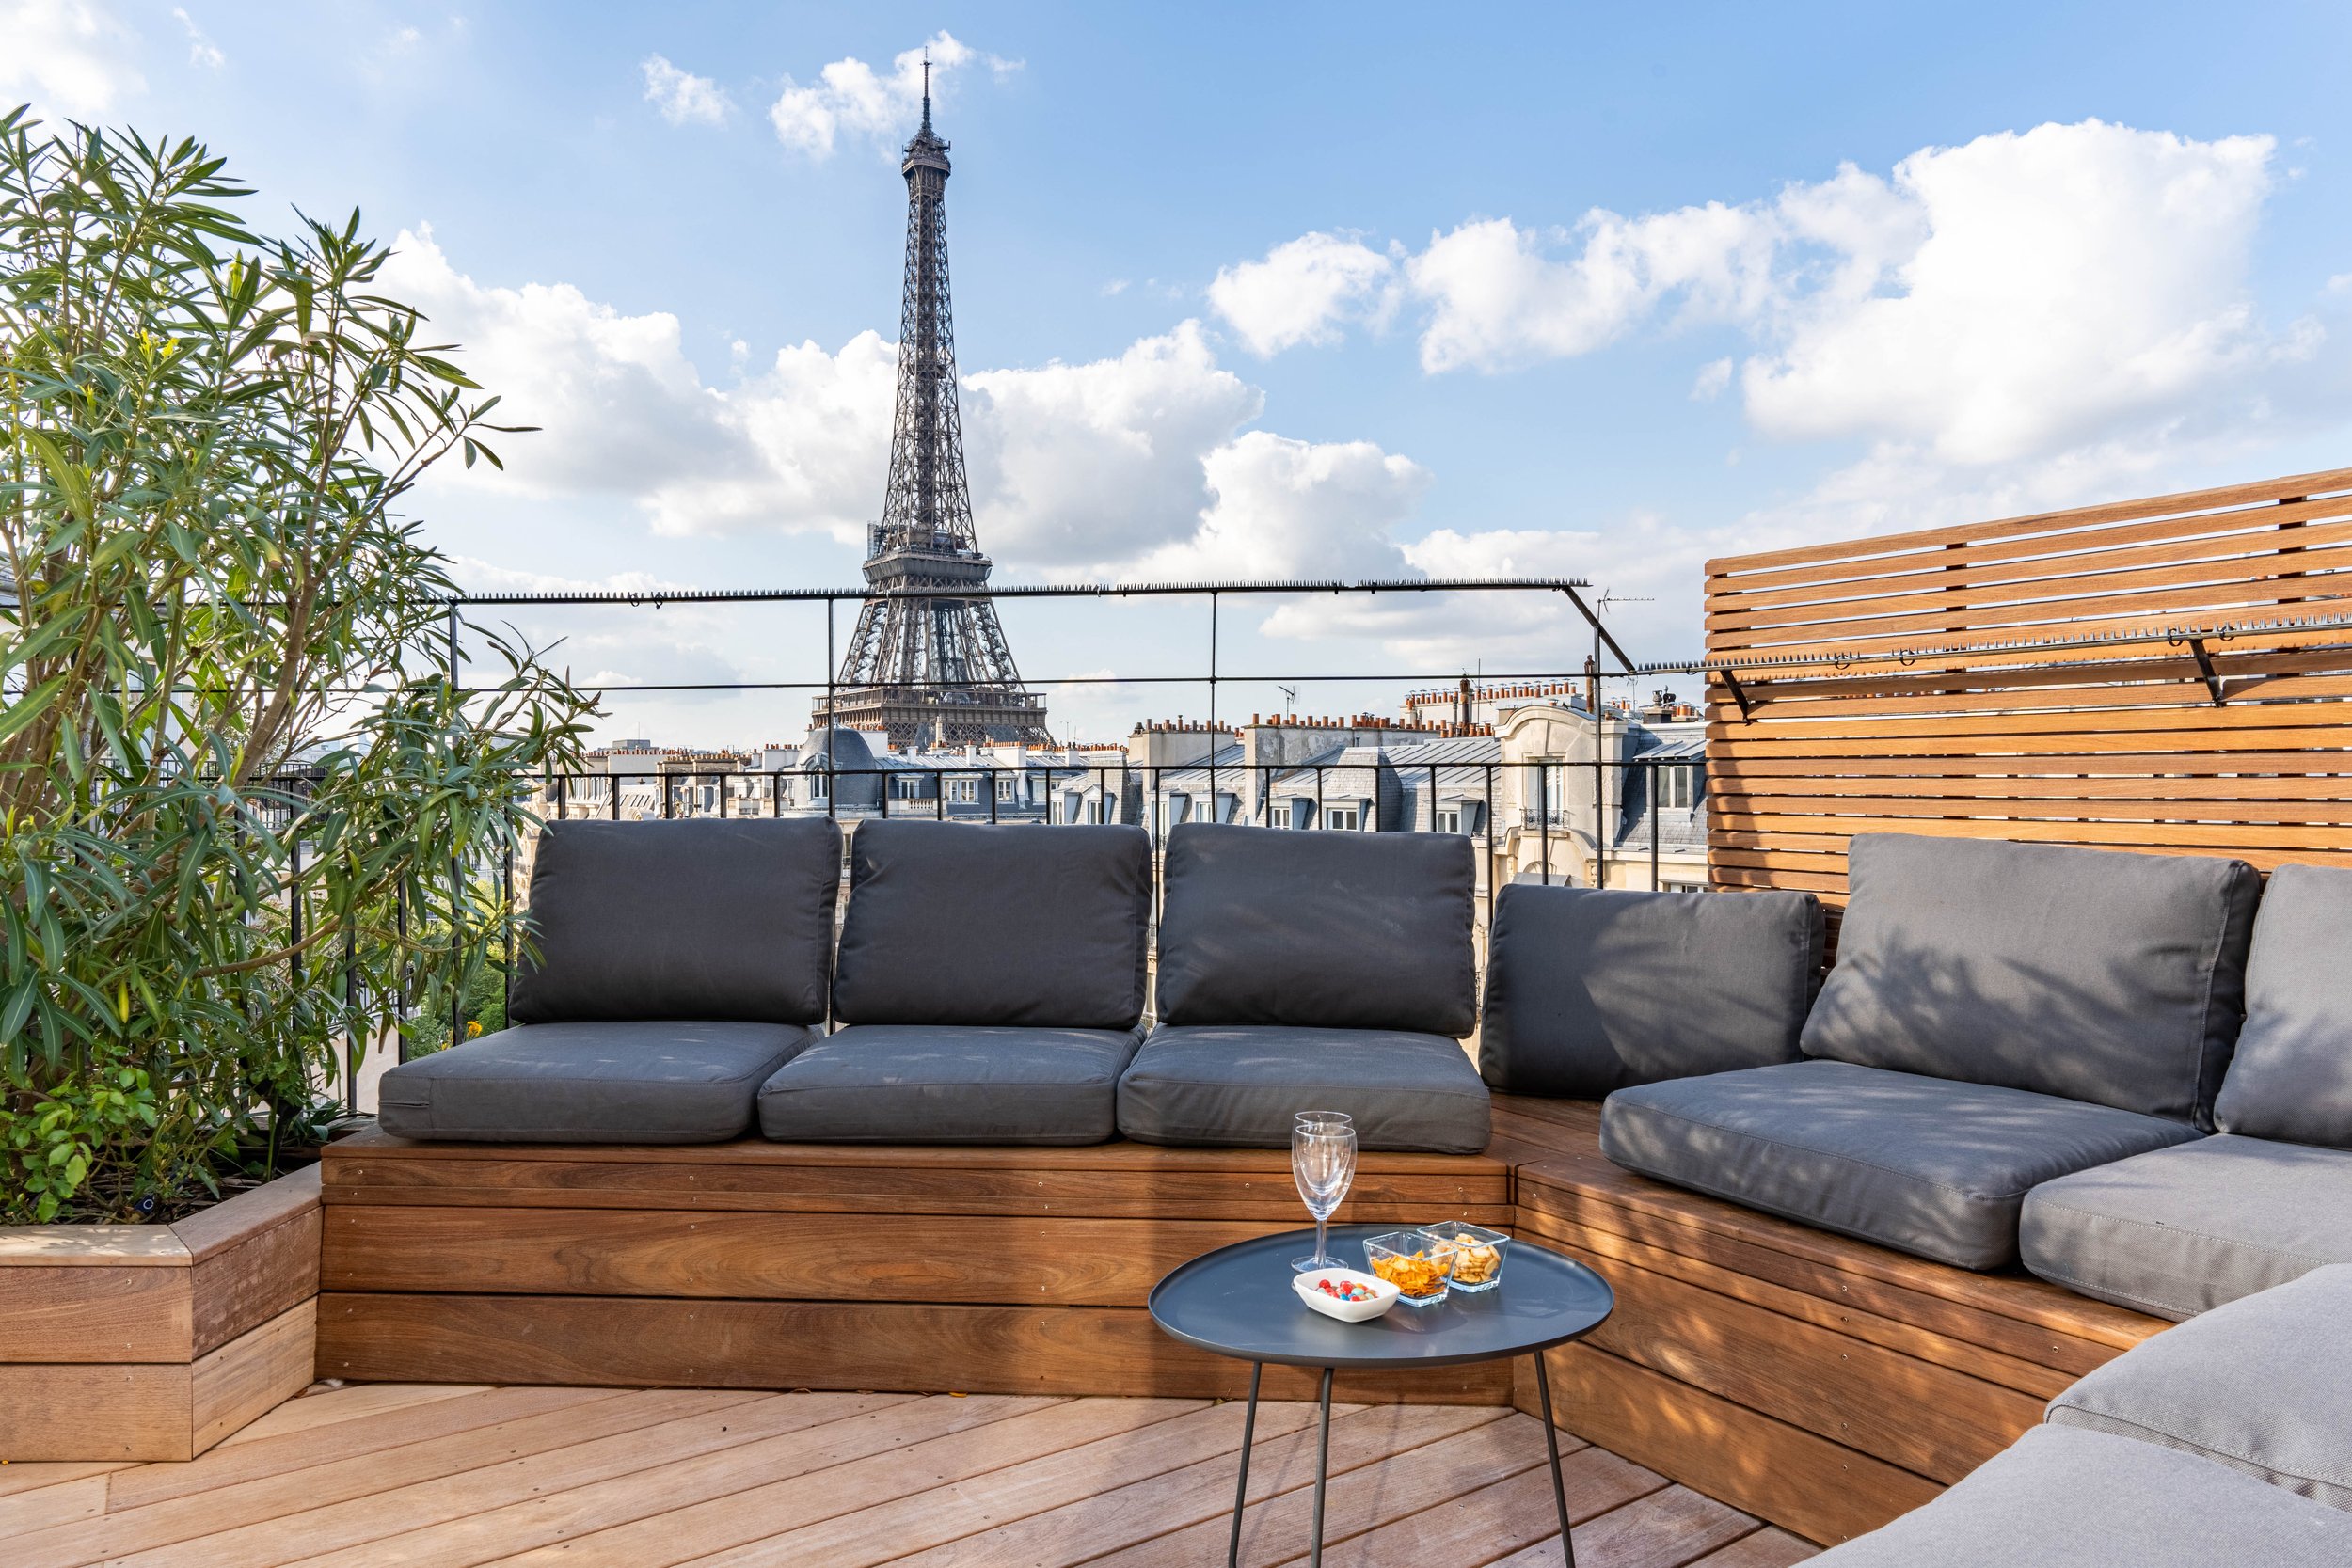 Luxury apartment and rooftop in Paris overlooking the Eiffel Tower